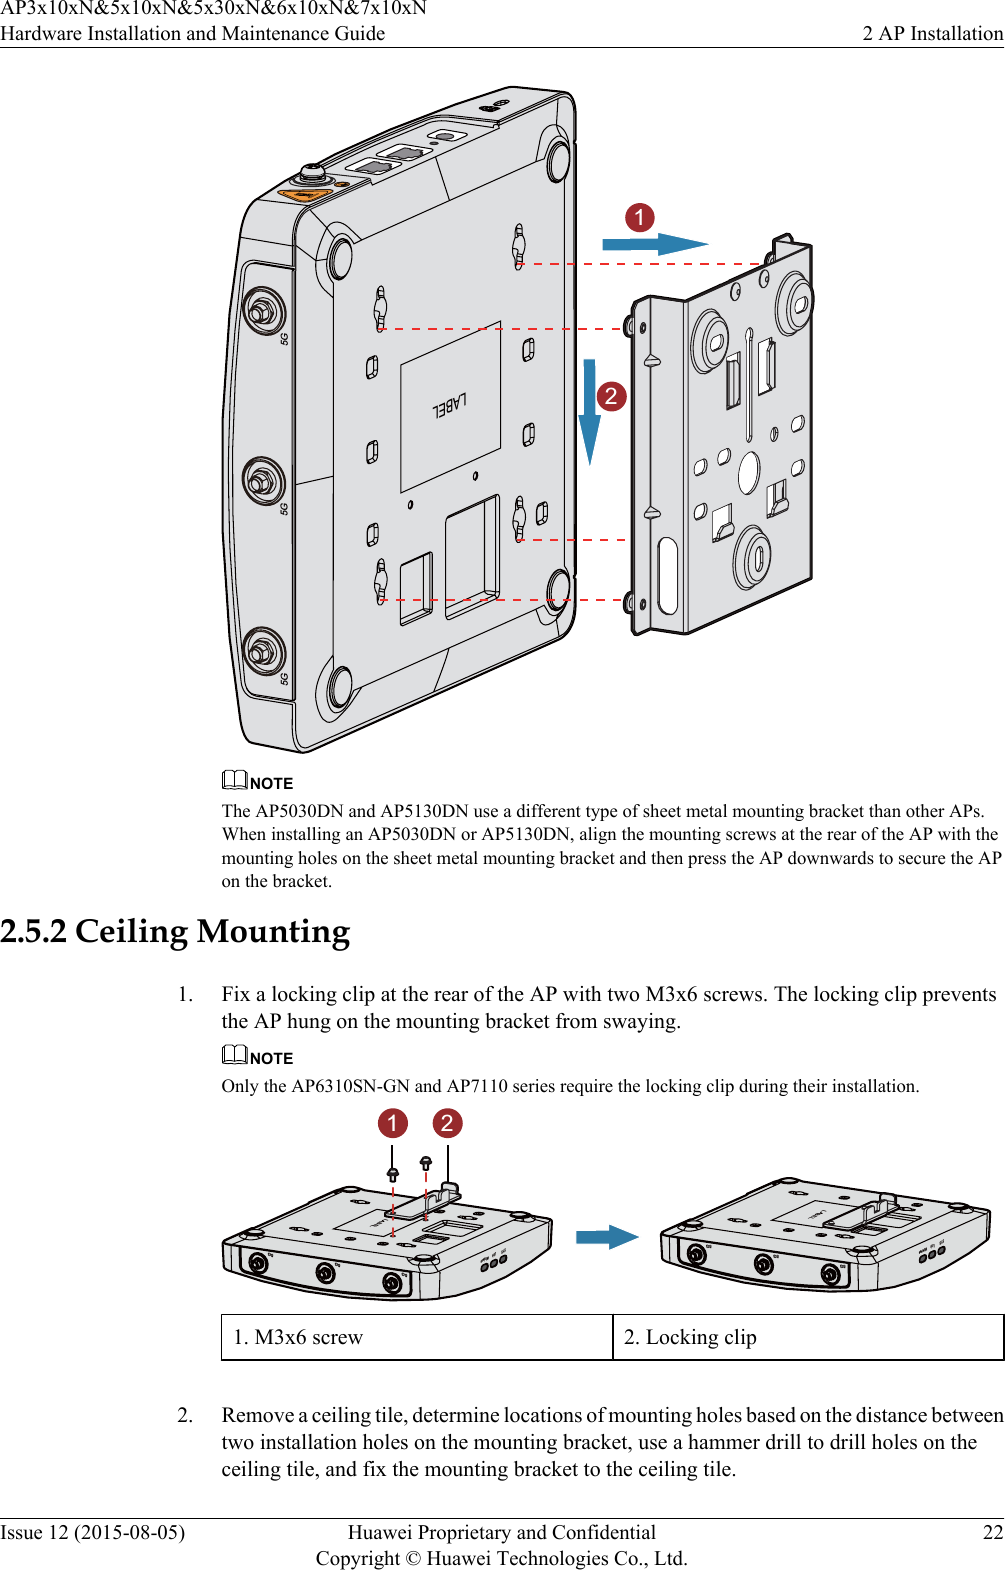 125G 5G 5GLABELNOTEThe AP5030DN and AP5130DN use a different type of sheet metal mounting bracket than other APs.When installing an AP5030DN or AP5130DN, align the mounting screws at the rear of the AP with themounting holes on the sheet metal mounting bracket and then press the AP downwards to secure the APon the bracket.2.5.2 Ceiling Mounting1. Fix a locking clip at the rear of the AP with two M3x6 screws. The locking clip preventsthe AP hung on the mounting bracket from swaying.NOTEOnly the AP6310SN-GN and AP7110 series require the locking clip during their installation.5G5G5GLABELSYS Link Wireless5G5G5GLABELSYS Link Wireless1 21. M3x6 screw 2. Locking clip 2. Remove a ceiling tile, determine locations of mounting holes based on the distance betweentwo installation holes on the mounting bracket, use a hammer drill to drill holes on theceiling tile, and fix the mounting bracket to the ceiling tile.AP3x10xN&amp;5x10xN&amp;5x30xN&amp;6x10xN&amp;7x10xNHardware Installation and Maintenance Guide 2 AP InstallationIssue 12 (2015-08-05) Huawei Proprietary and ConfidentialCopyright © Huawei Technologies Co., Ltd.22